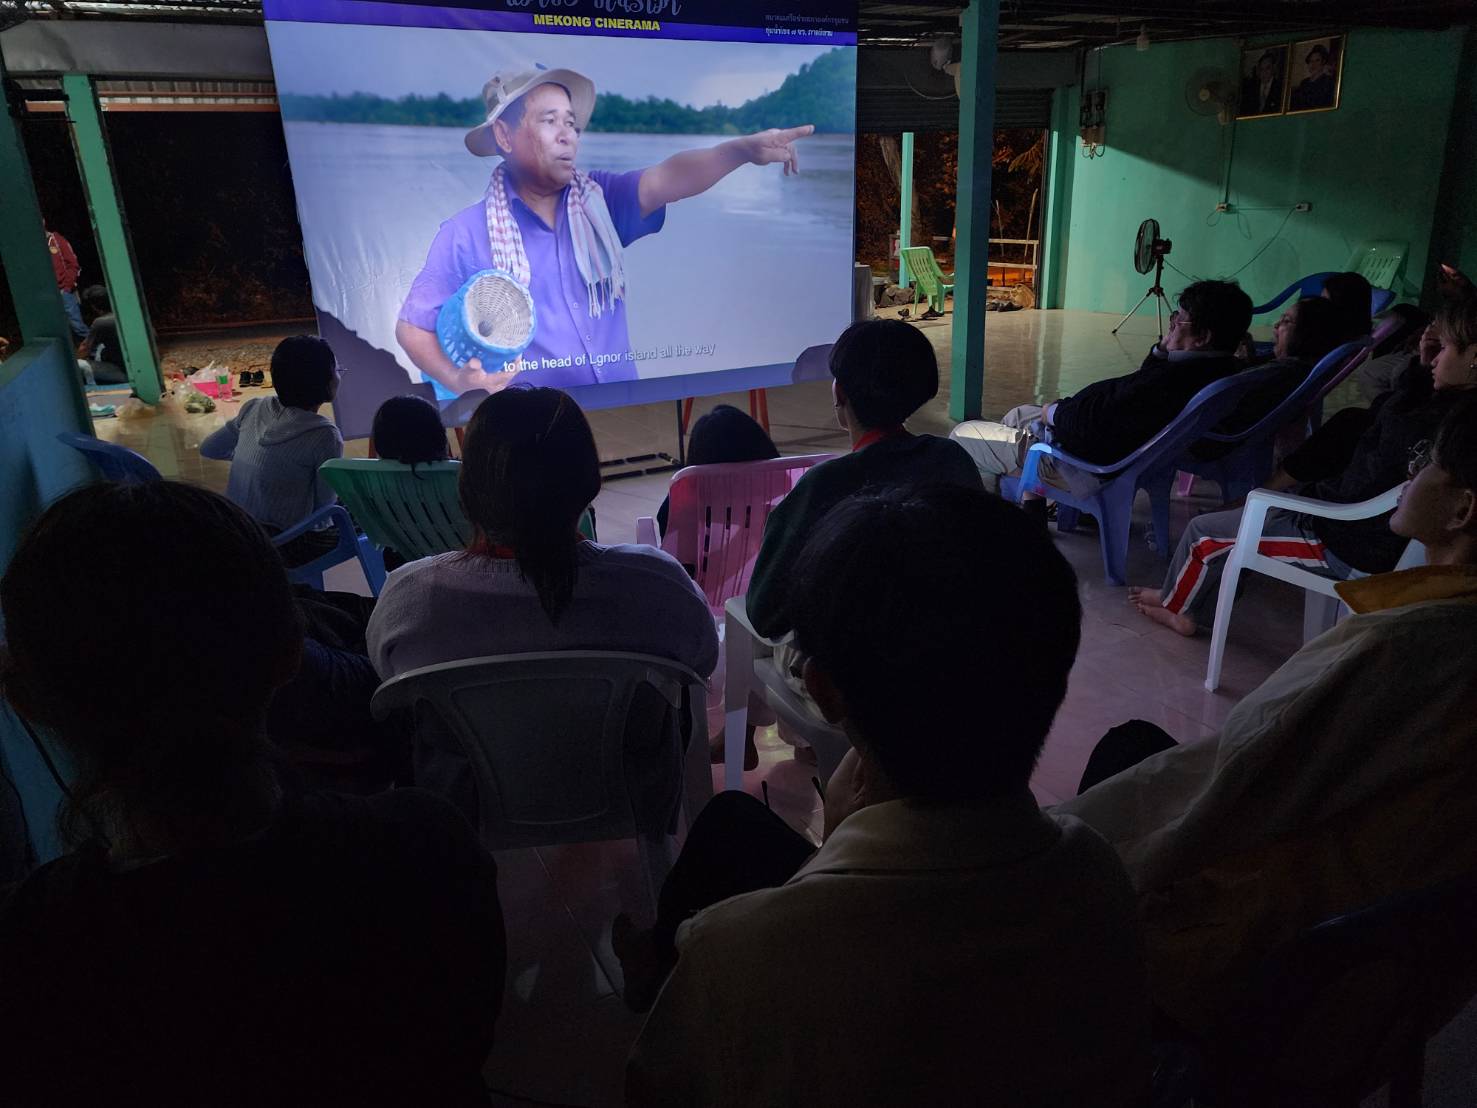 A crowd sits in chairs watching a movie on screen